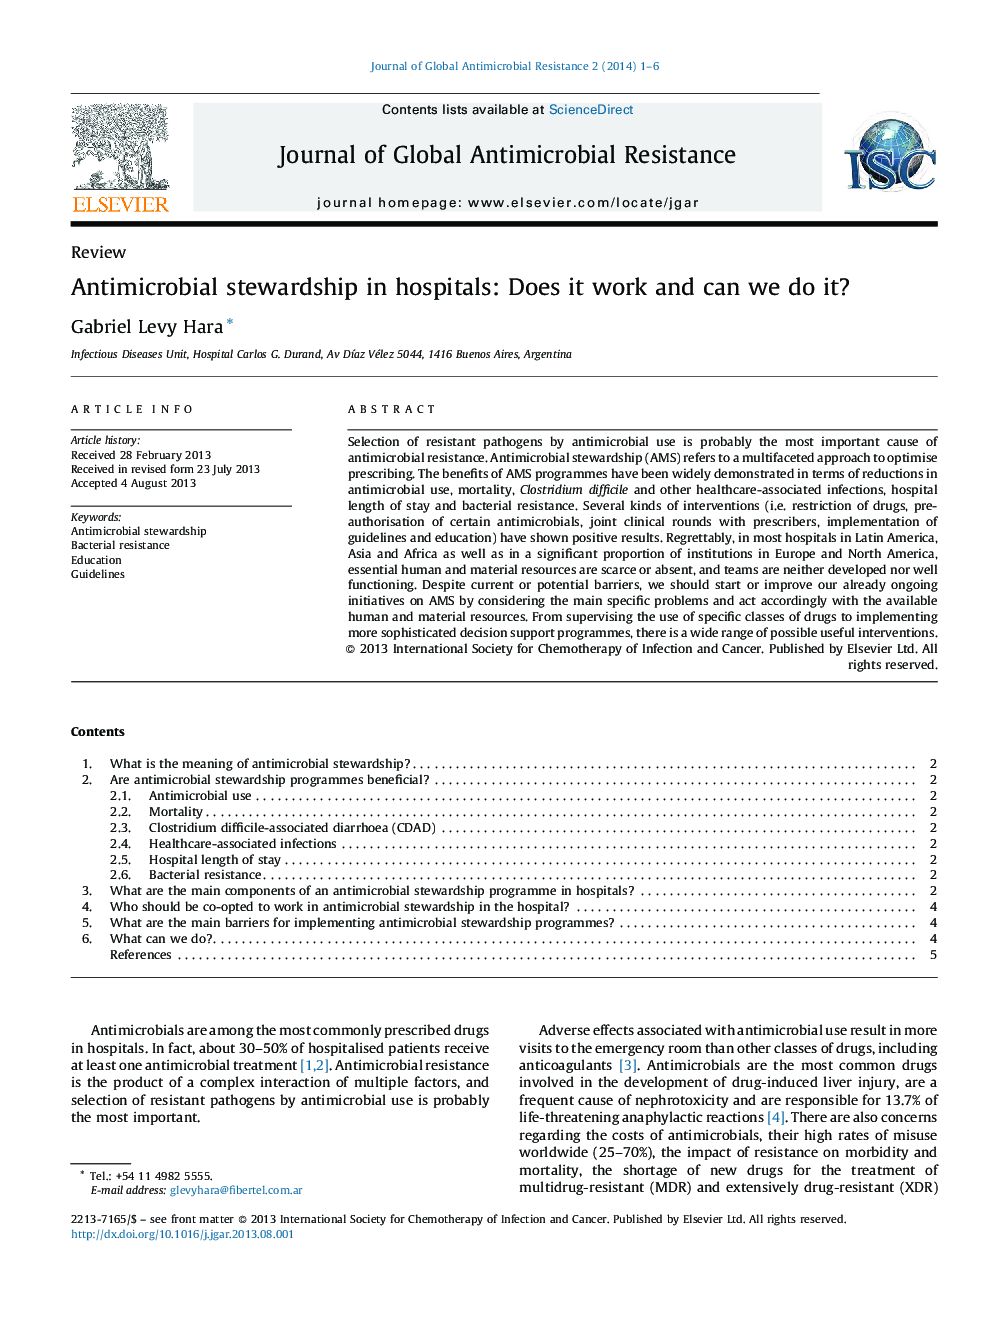 Antimicrobial stewardship in hospitals: Does it work and can we do it?